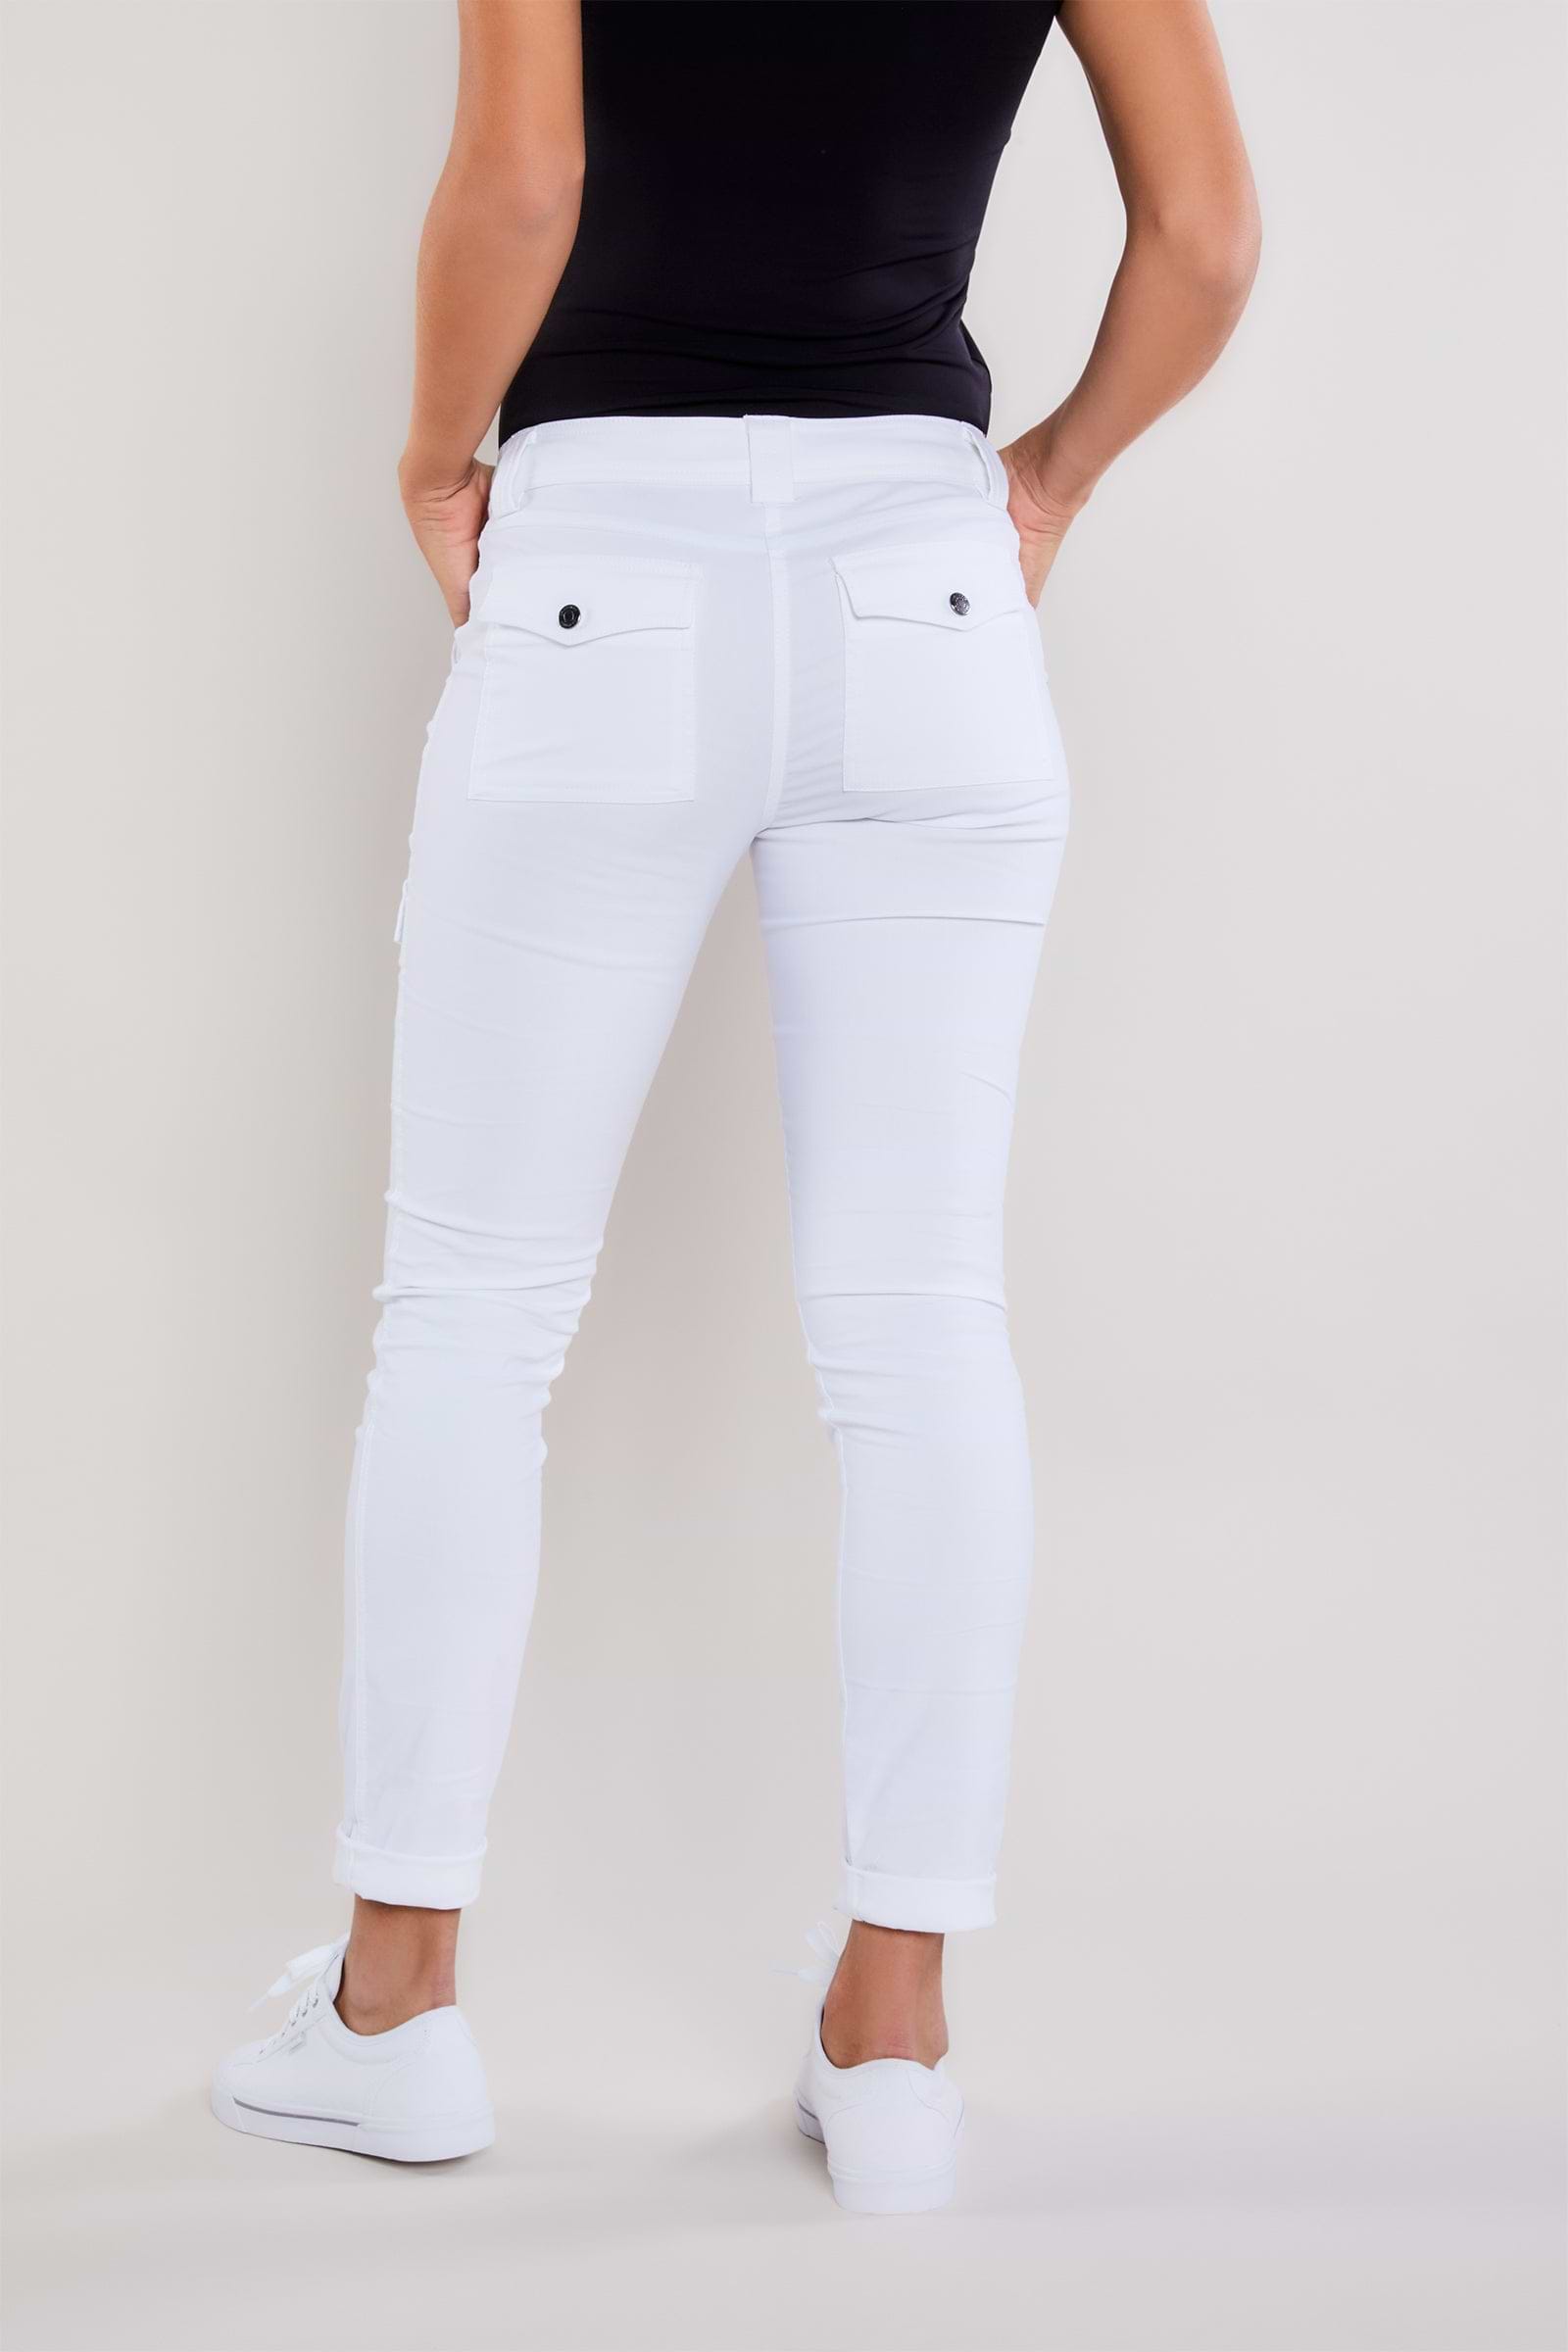 The Best Travel Cargo Pants. Back Profile of the Kate Skinny Cargo Pant in White